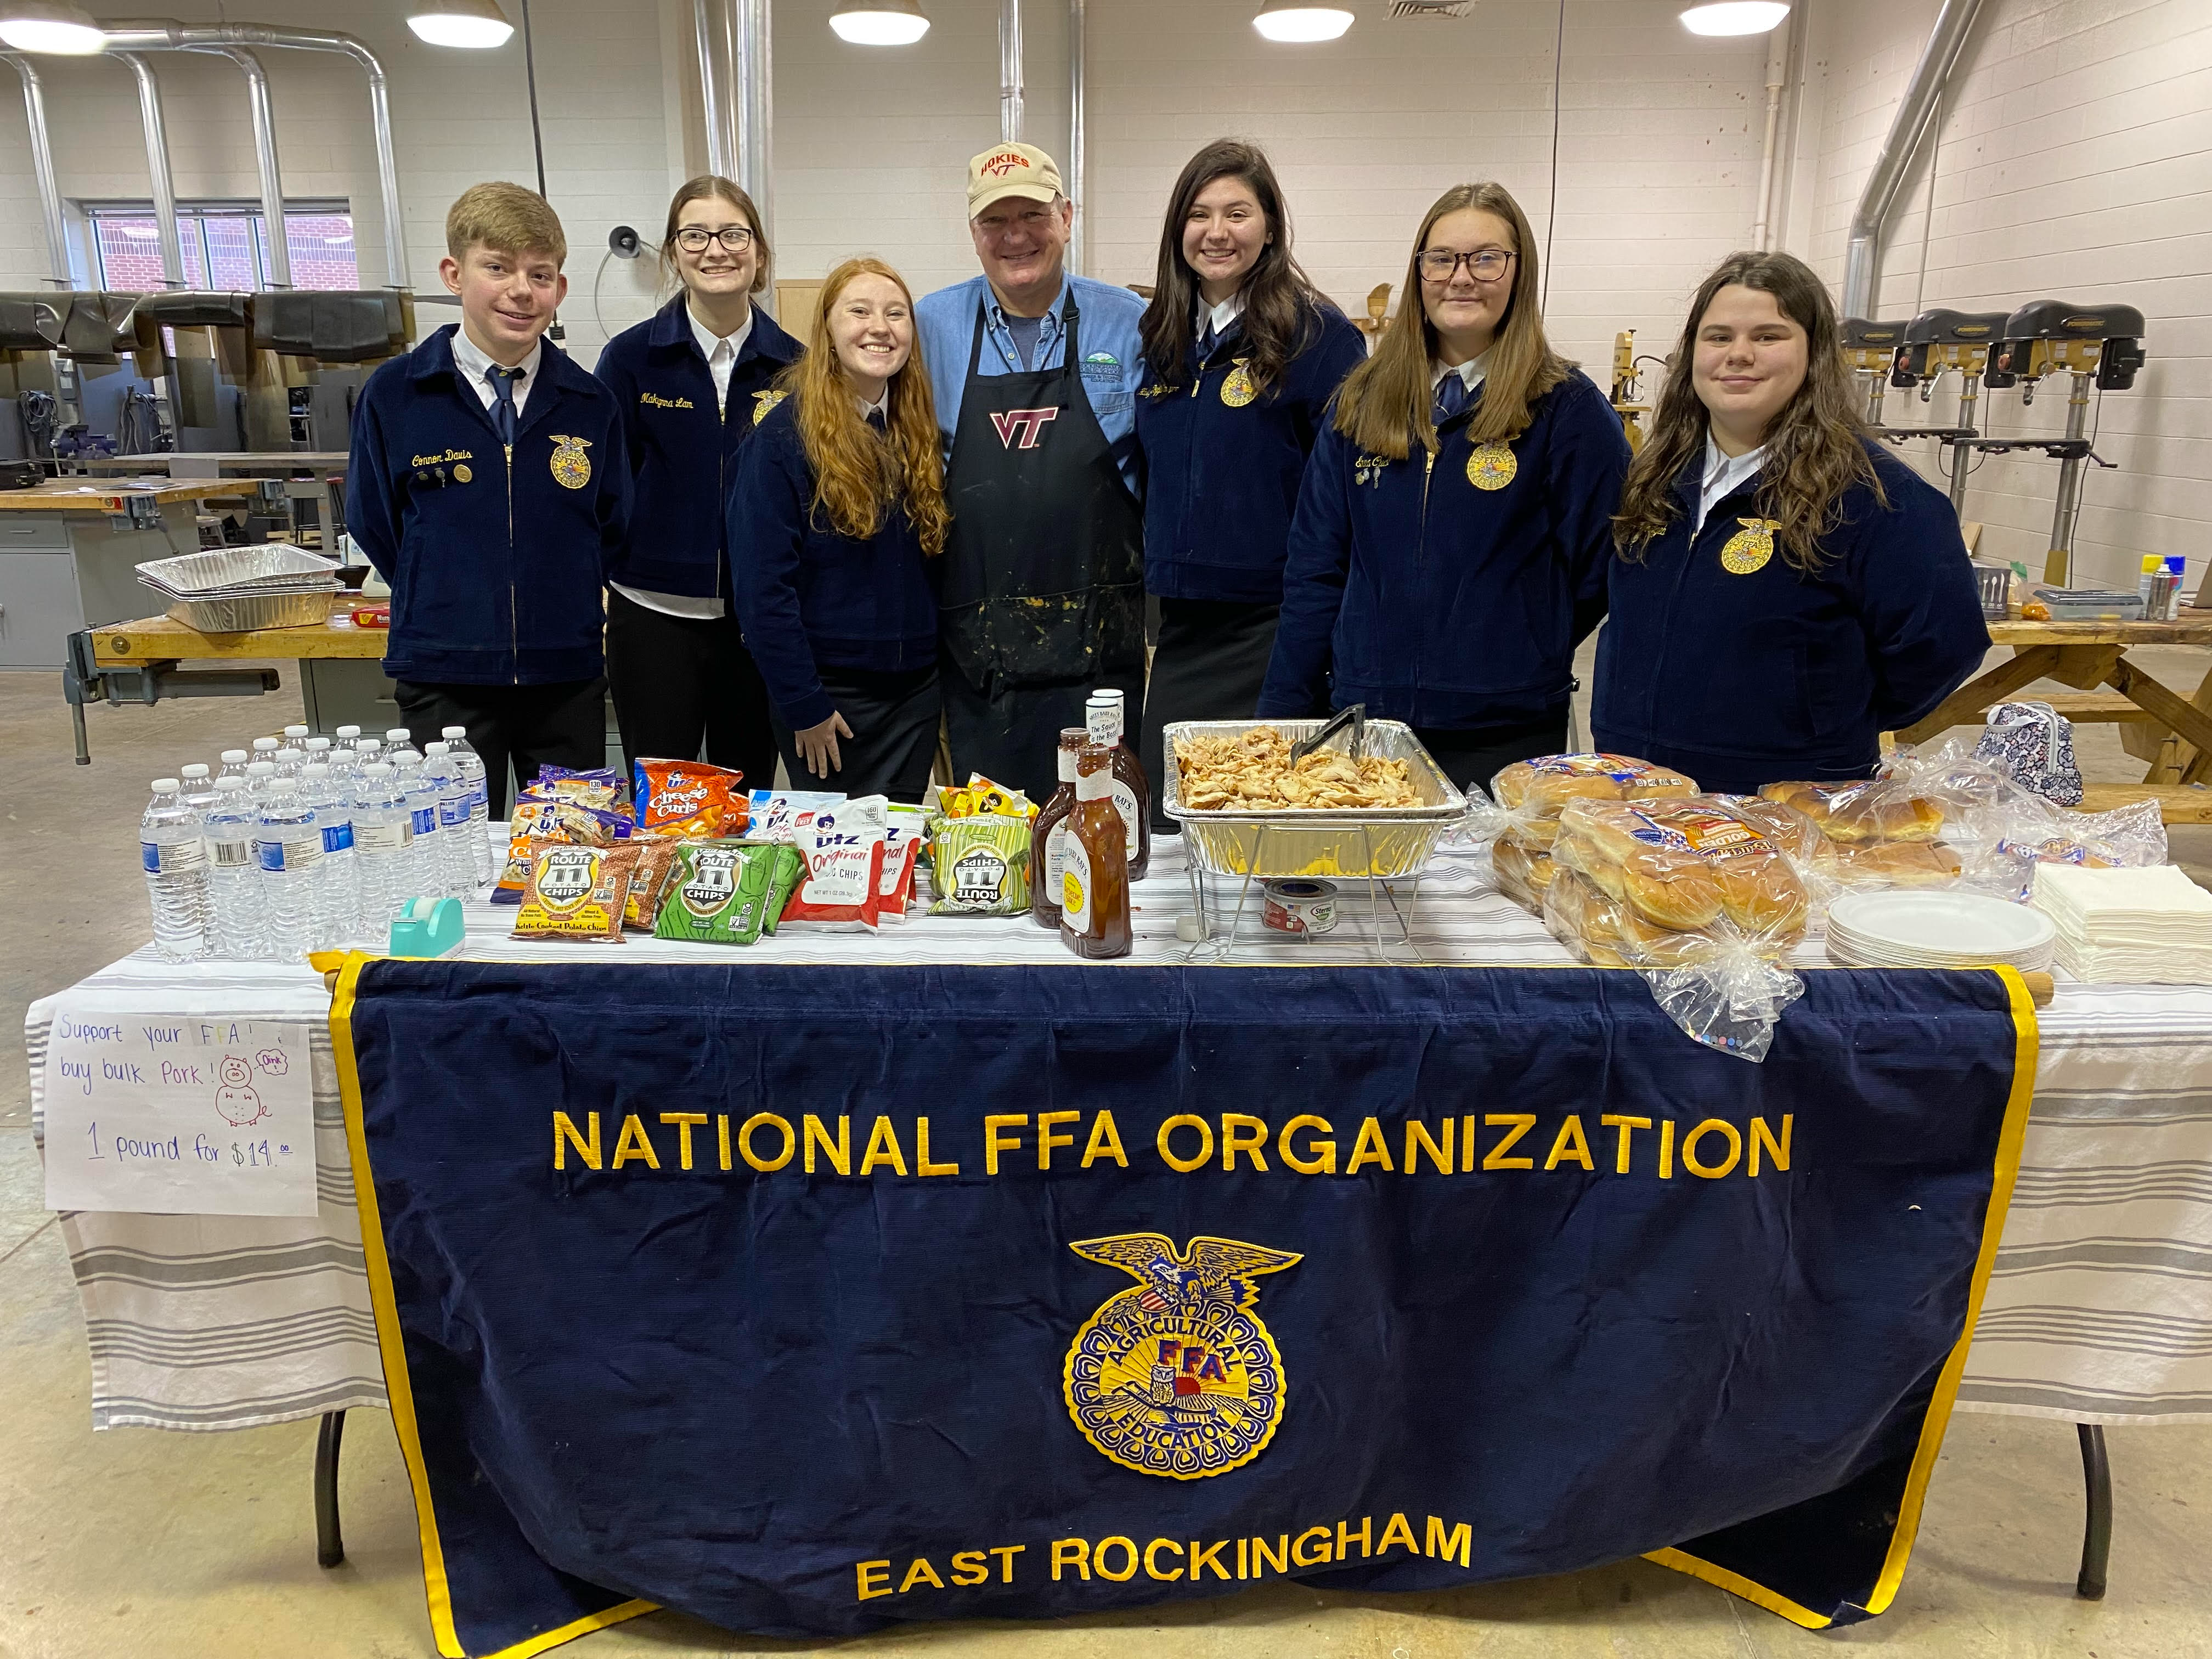 Meal for ERHS Faculty & Staff to celebrate National FFA Week